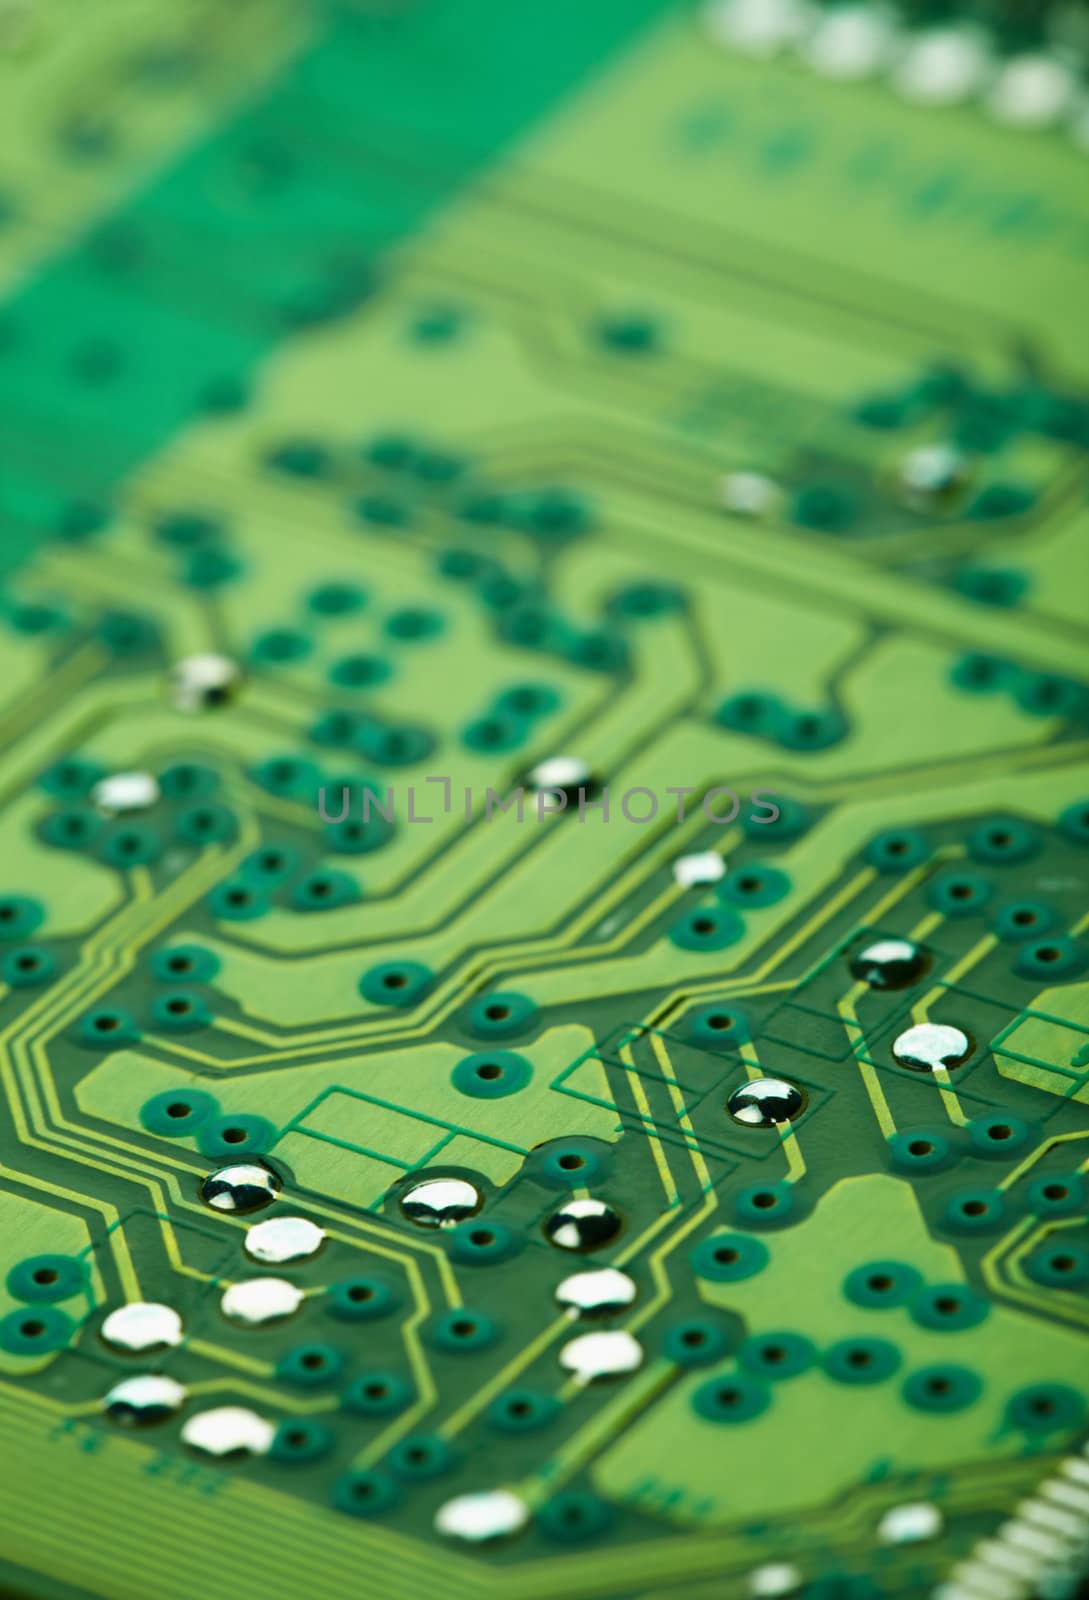 Abstract electronic background - the green printed-circuit board